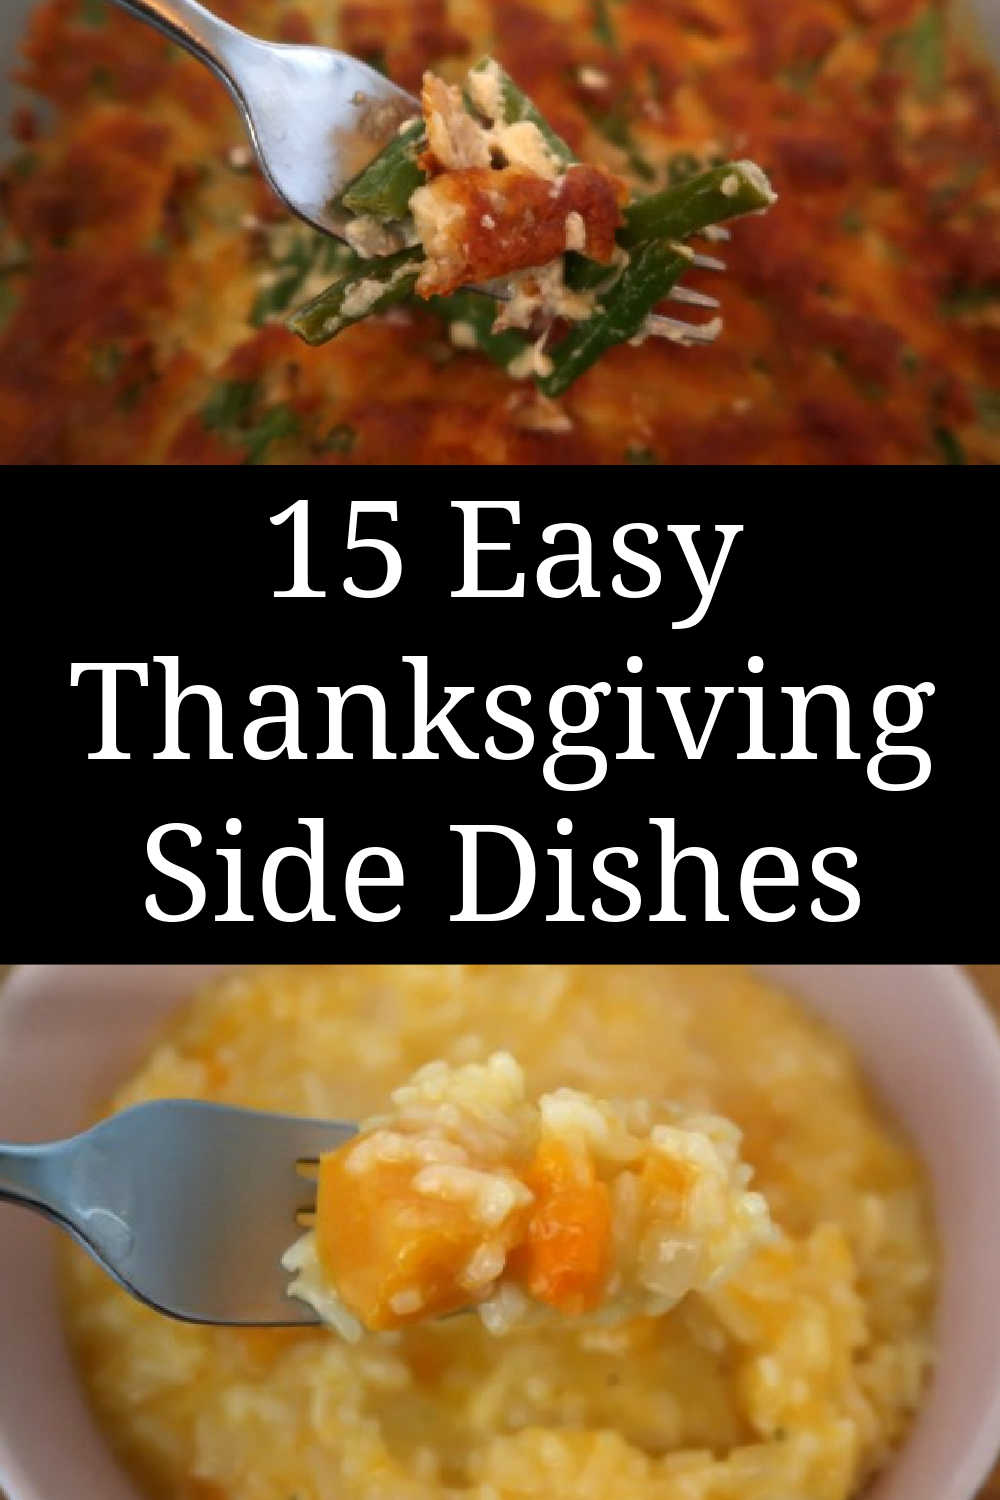 15 Easy Thanksgiving Side Dishes - The best quick sides recipes that you can prepare - including make ahead classic side dish ideas.